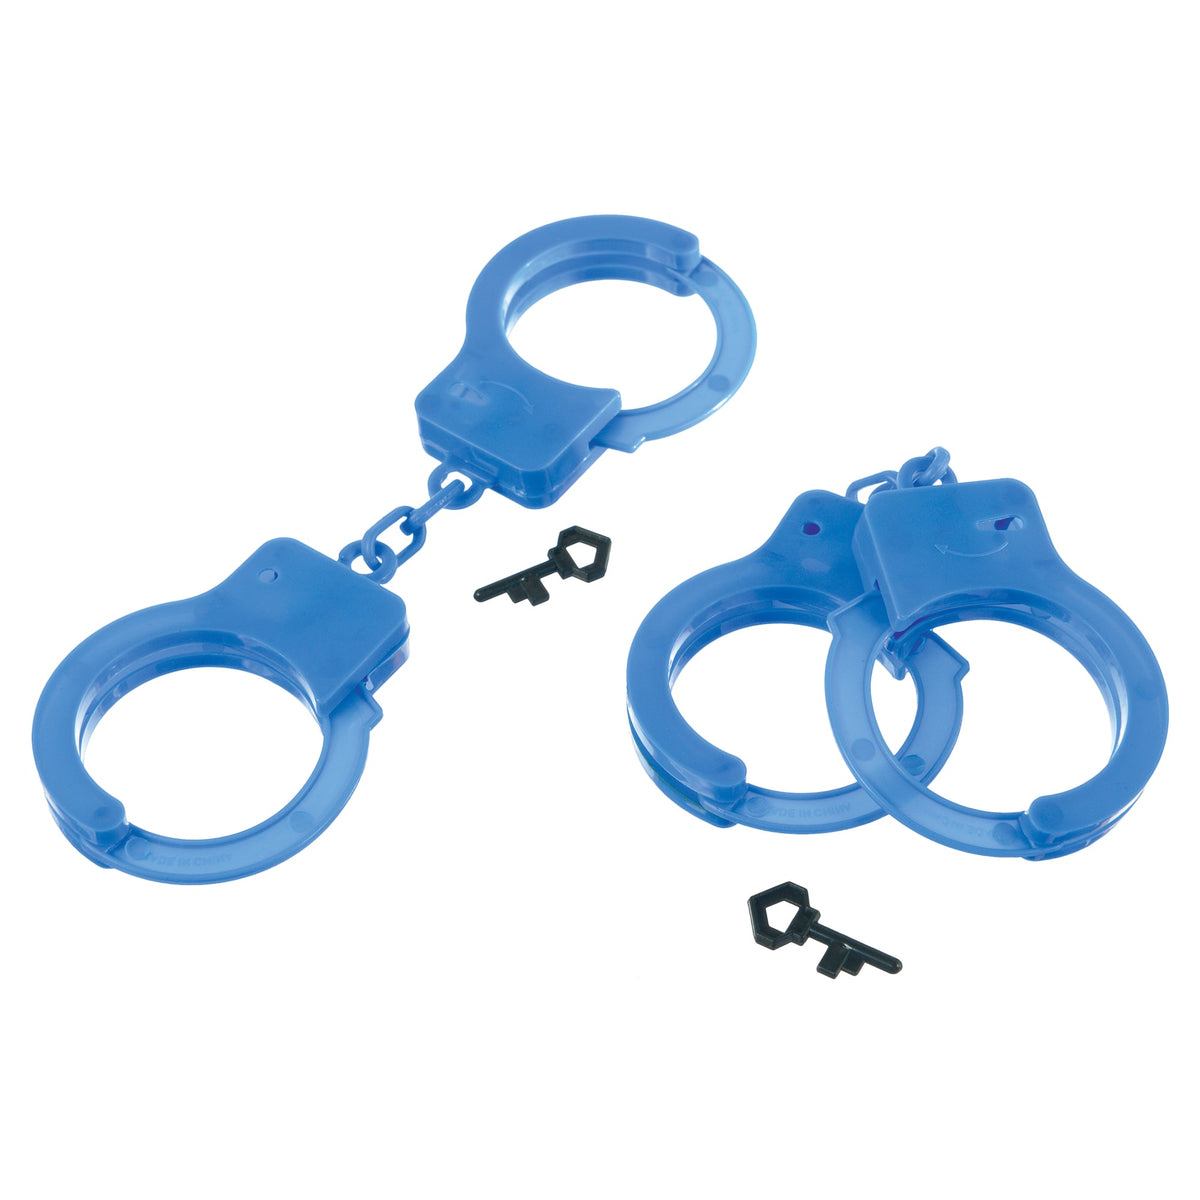 First Responders Plastic Handcuff Favor Package of 4